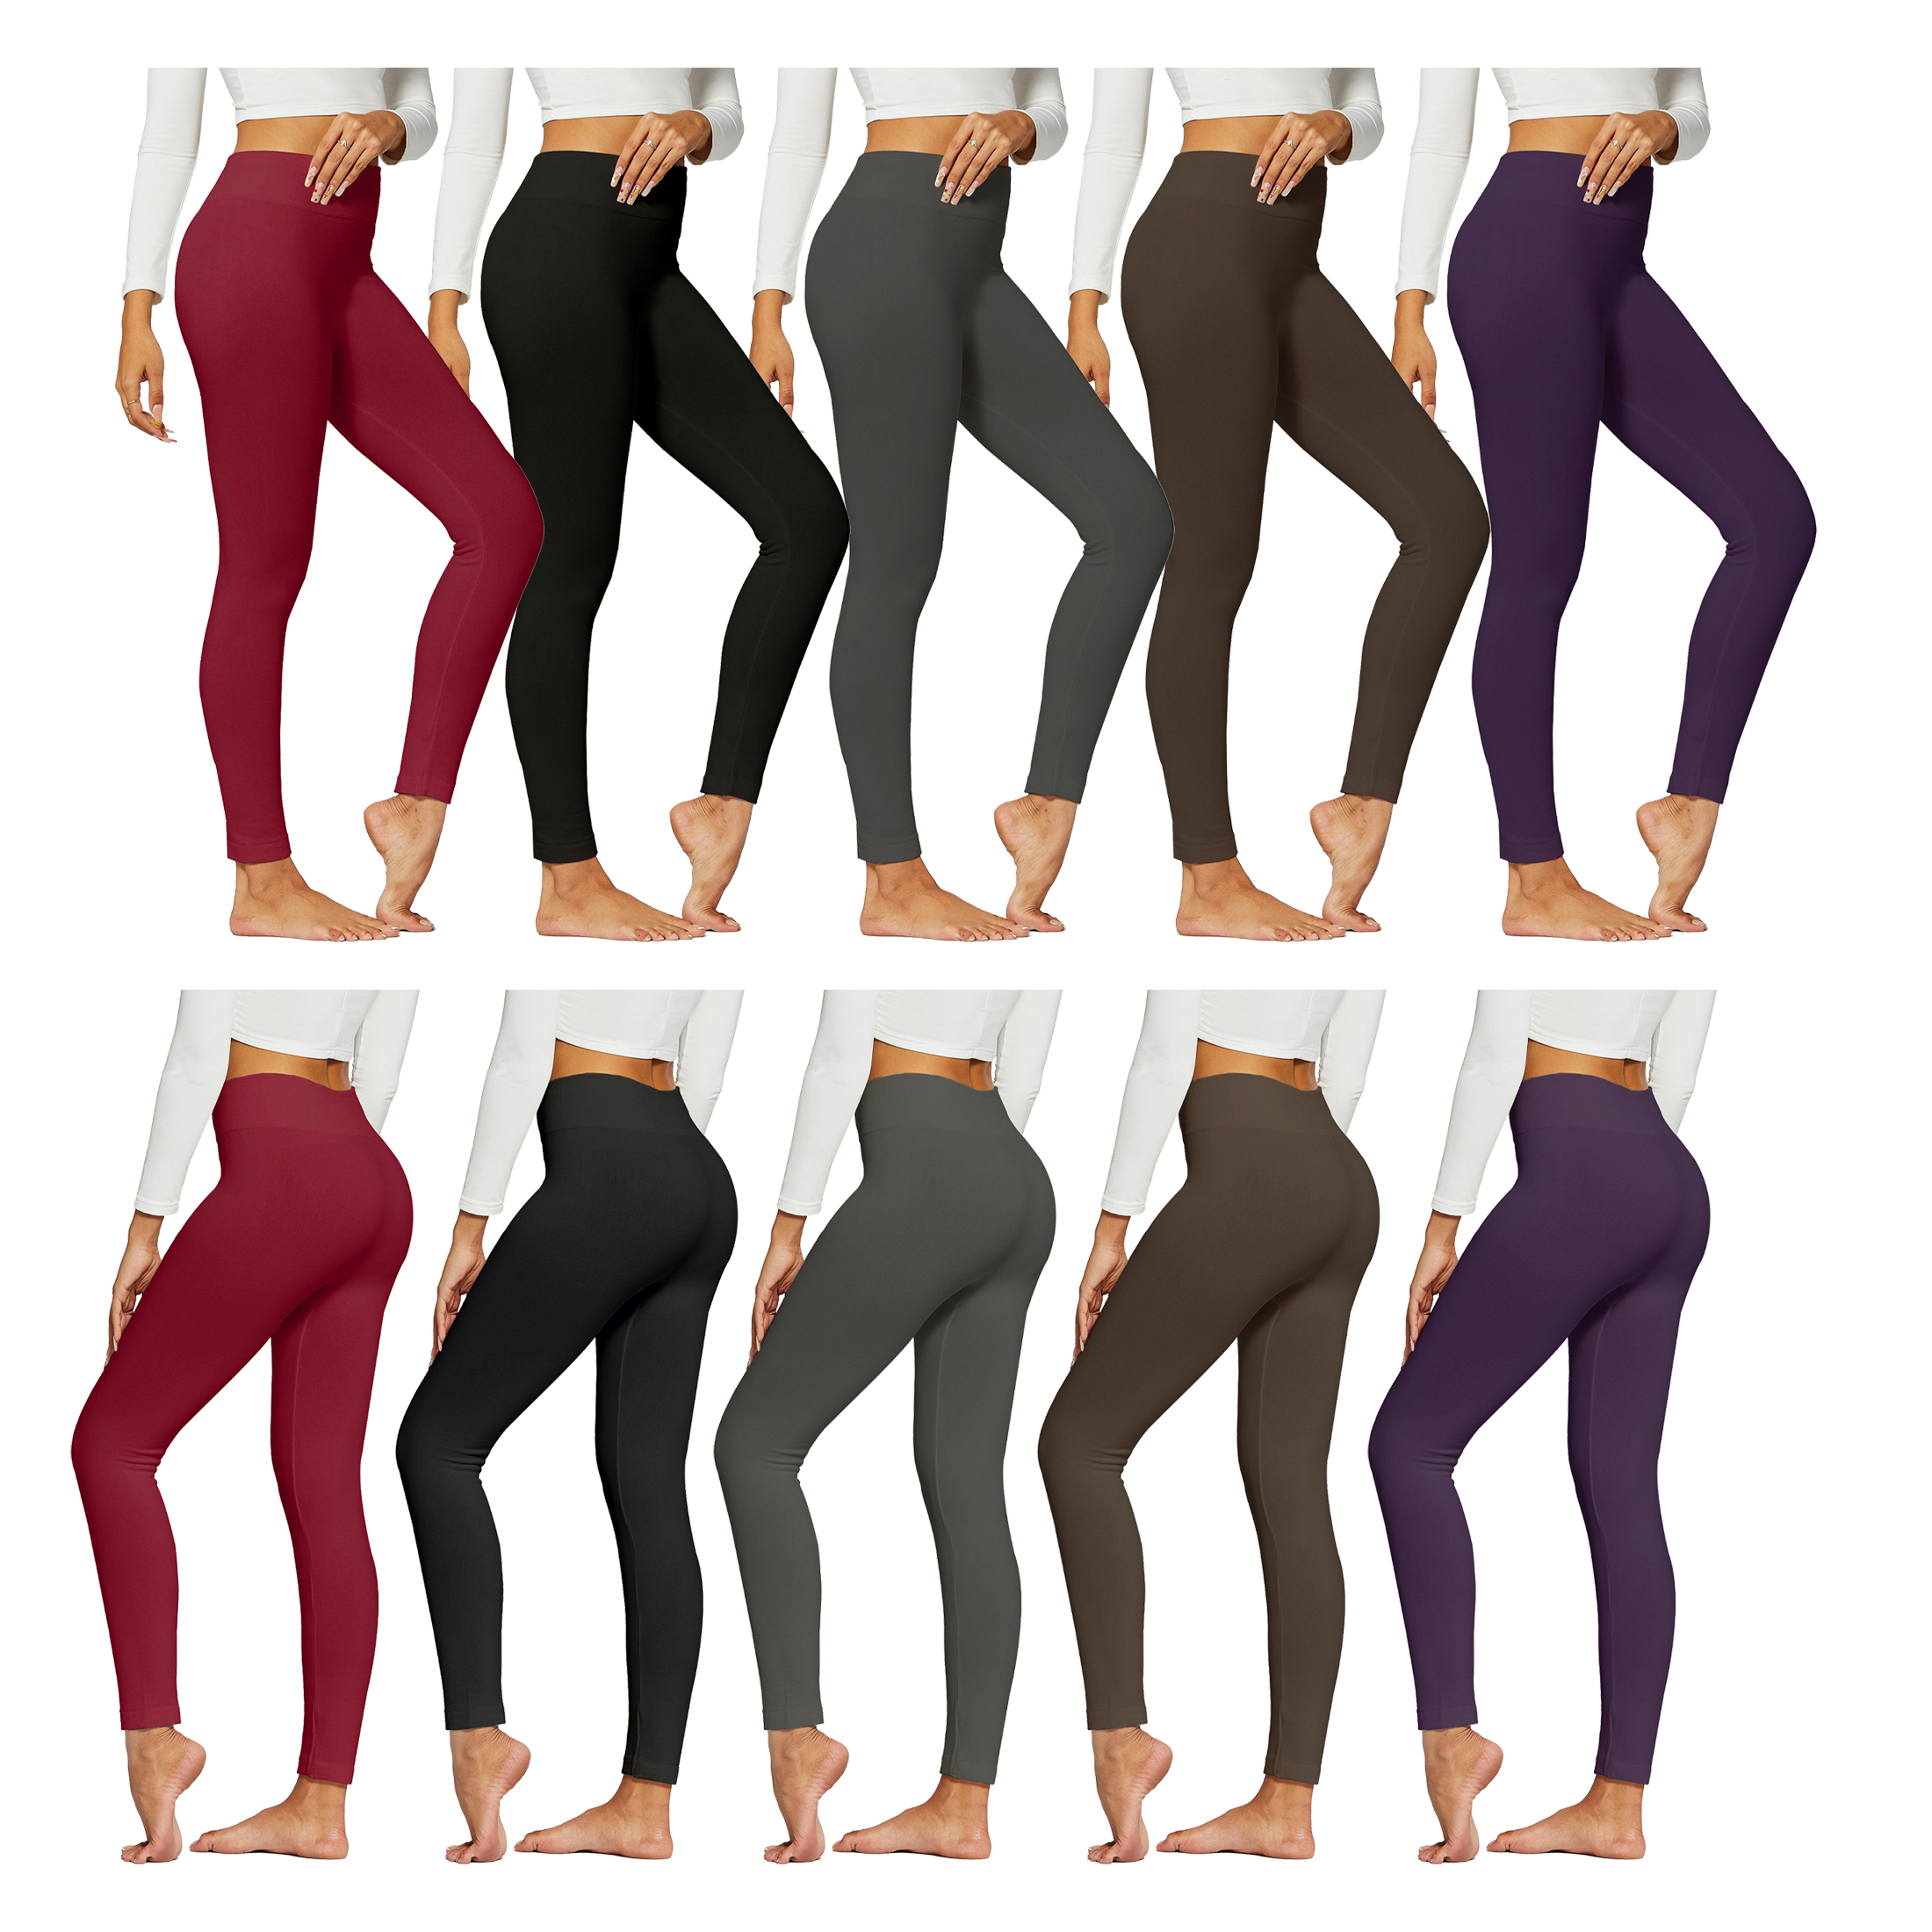 3-Pack:Women's Premium Quality High-Waist Fleece-Lined Leggings (Plus Size Available) - Black, Grey & Brown, Small/Medium